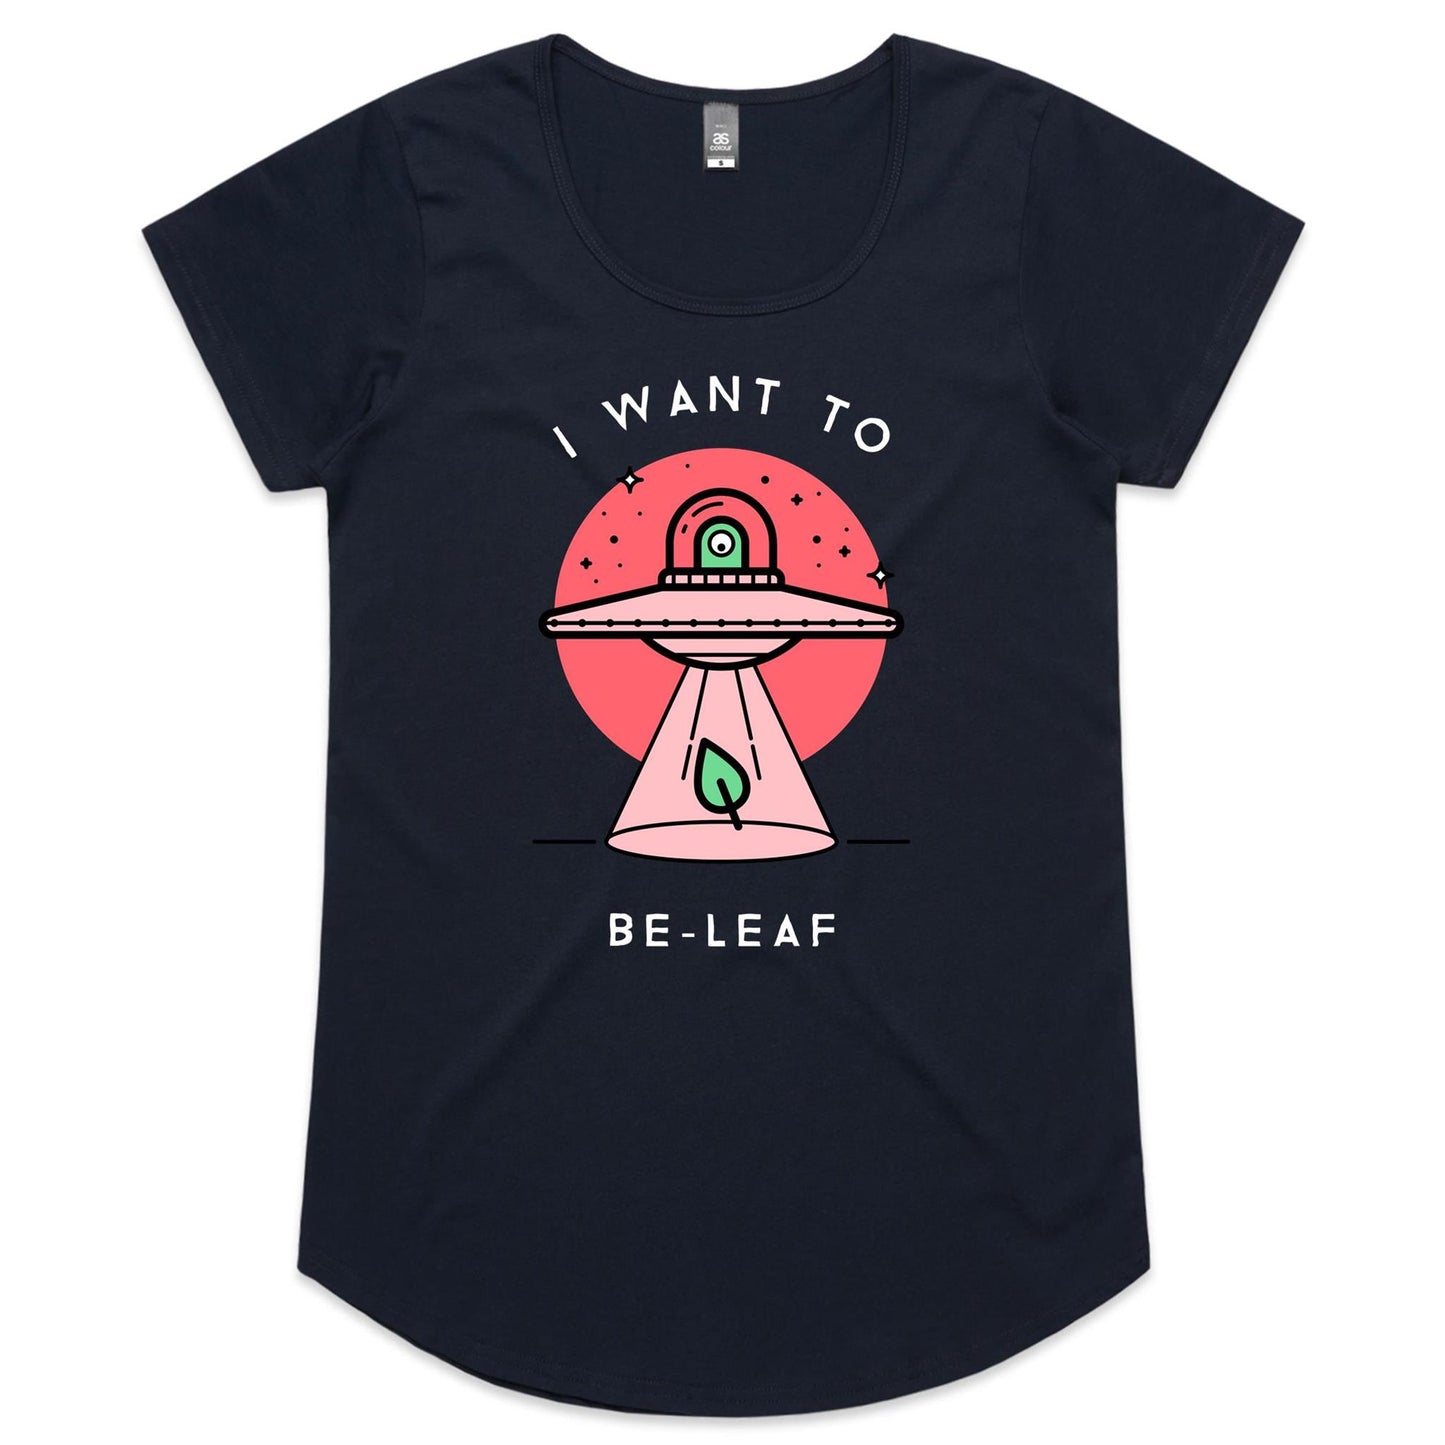 I Want To Be-Leaf, UFO - Womens Scoop Neck T-Shirt Navy Womens Scoop Neck T-shirt Sci Fi